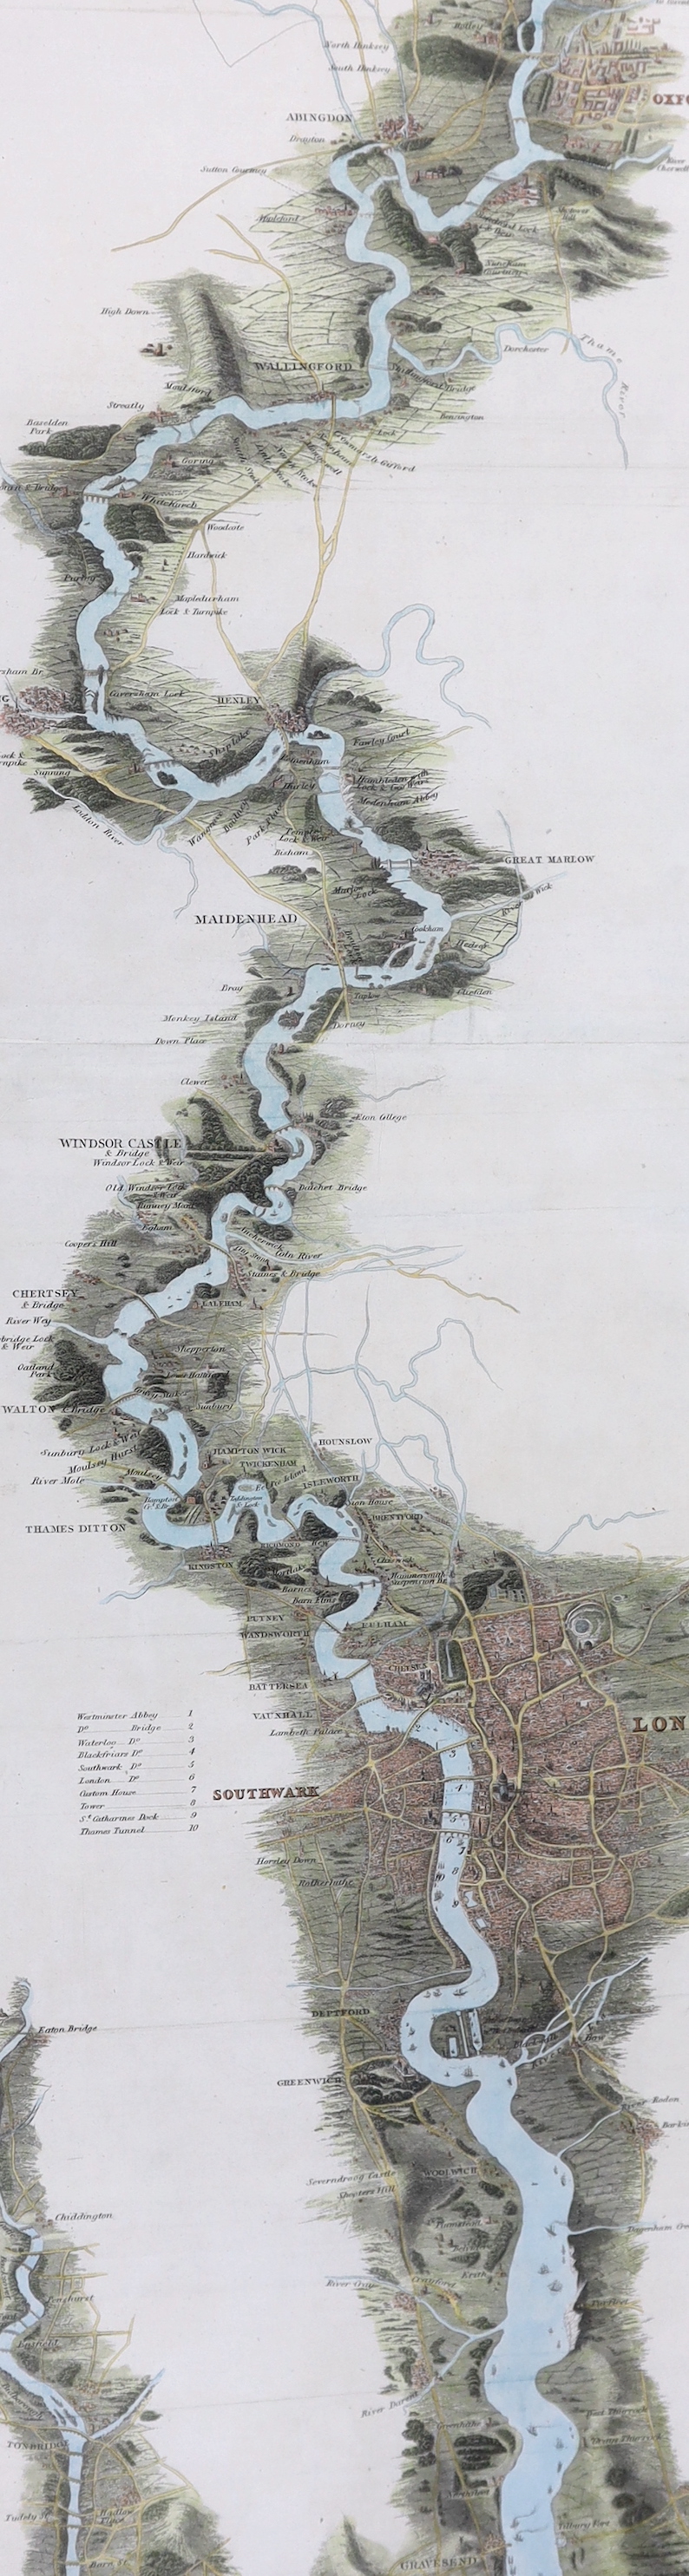 Tombleson's Thames, hand coloured engraved panoramic map of the Thames and Medway, 127 x 24cm